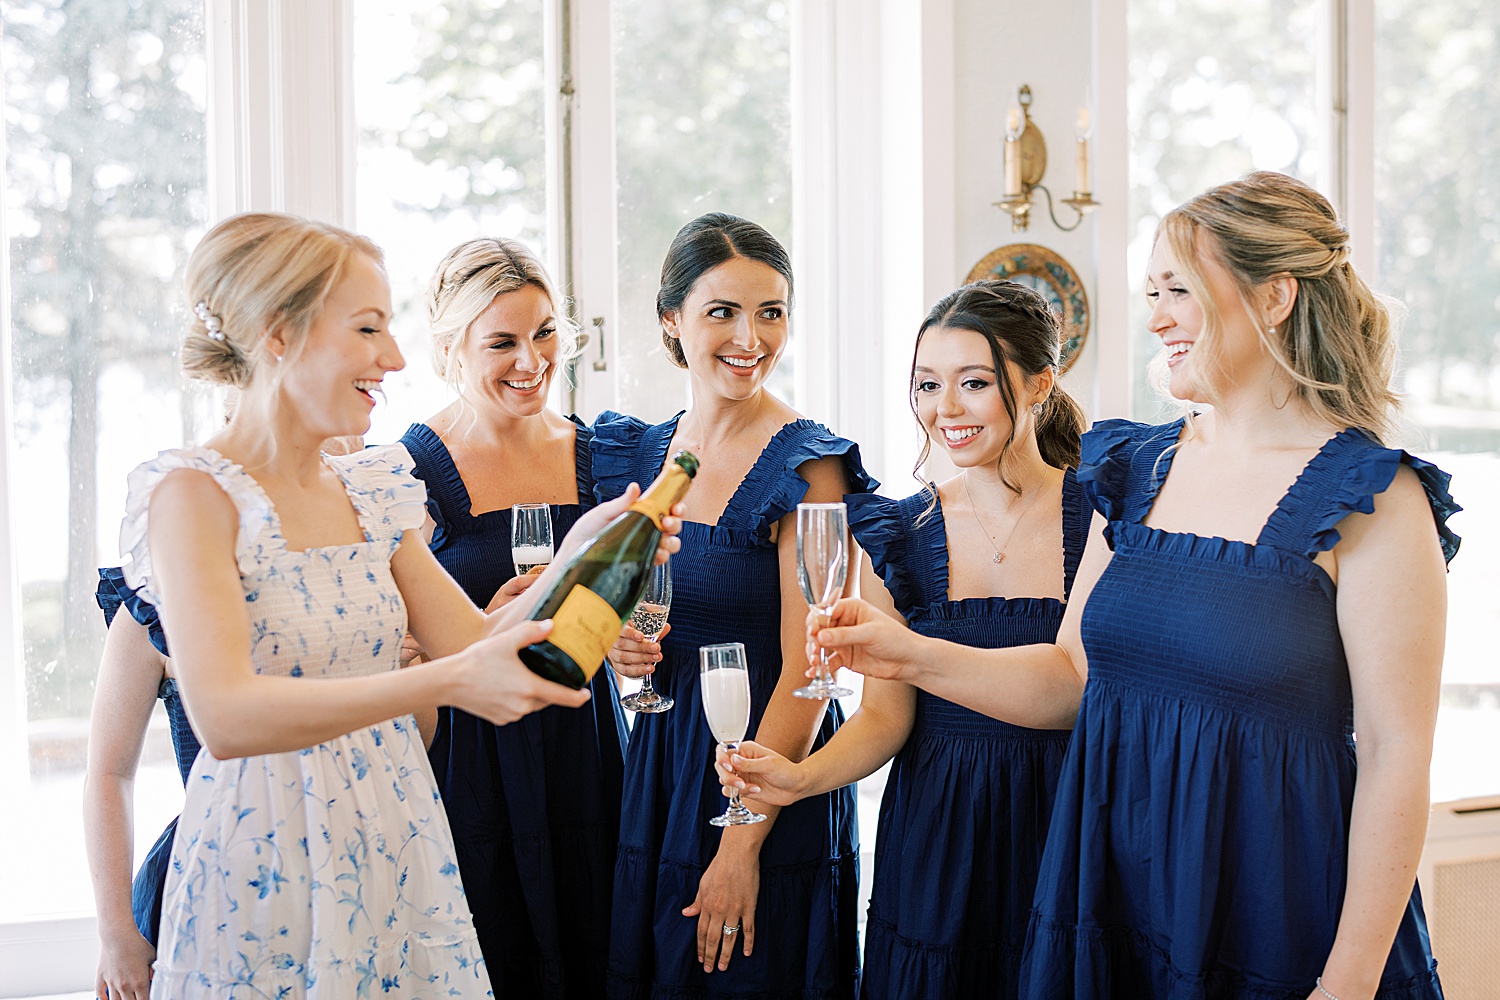 bride in blue and white dress pours champagne for bridesmaids in blue dresses 